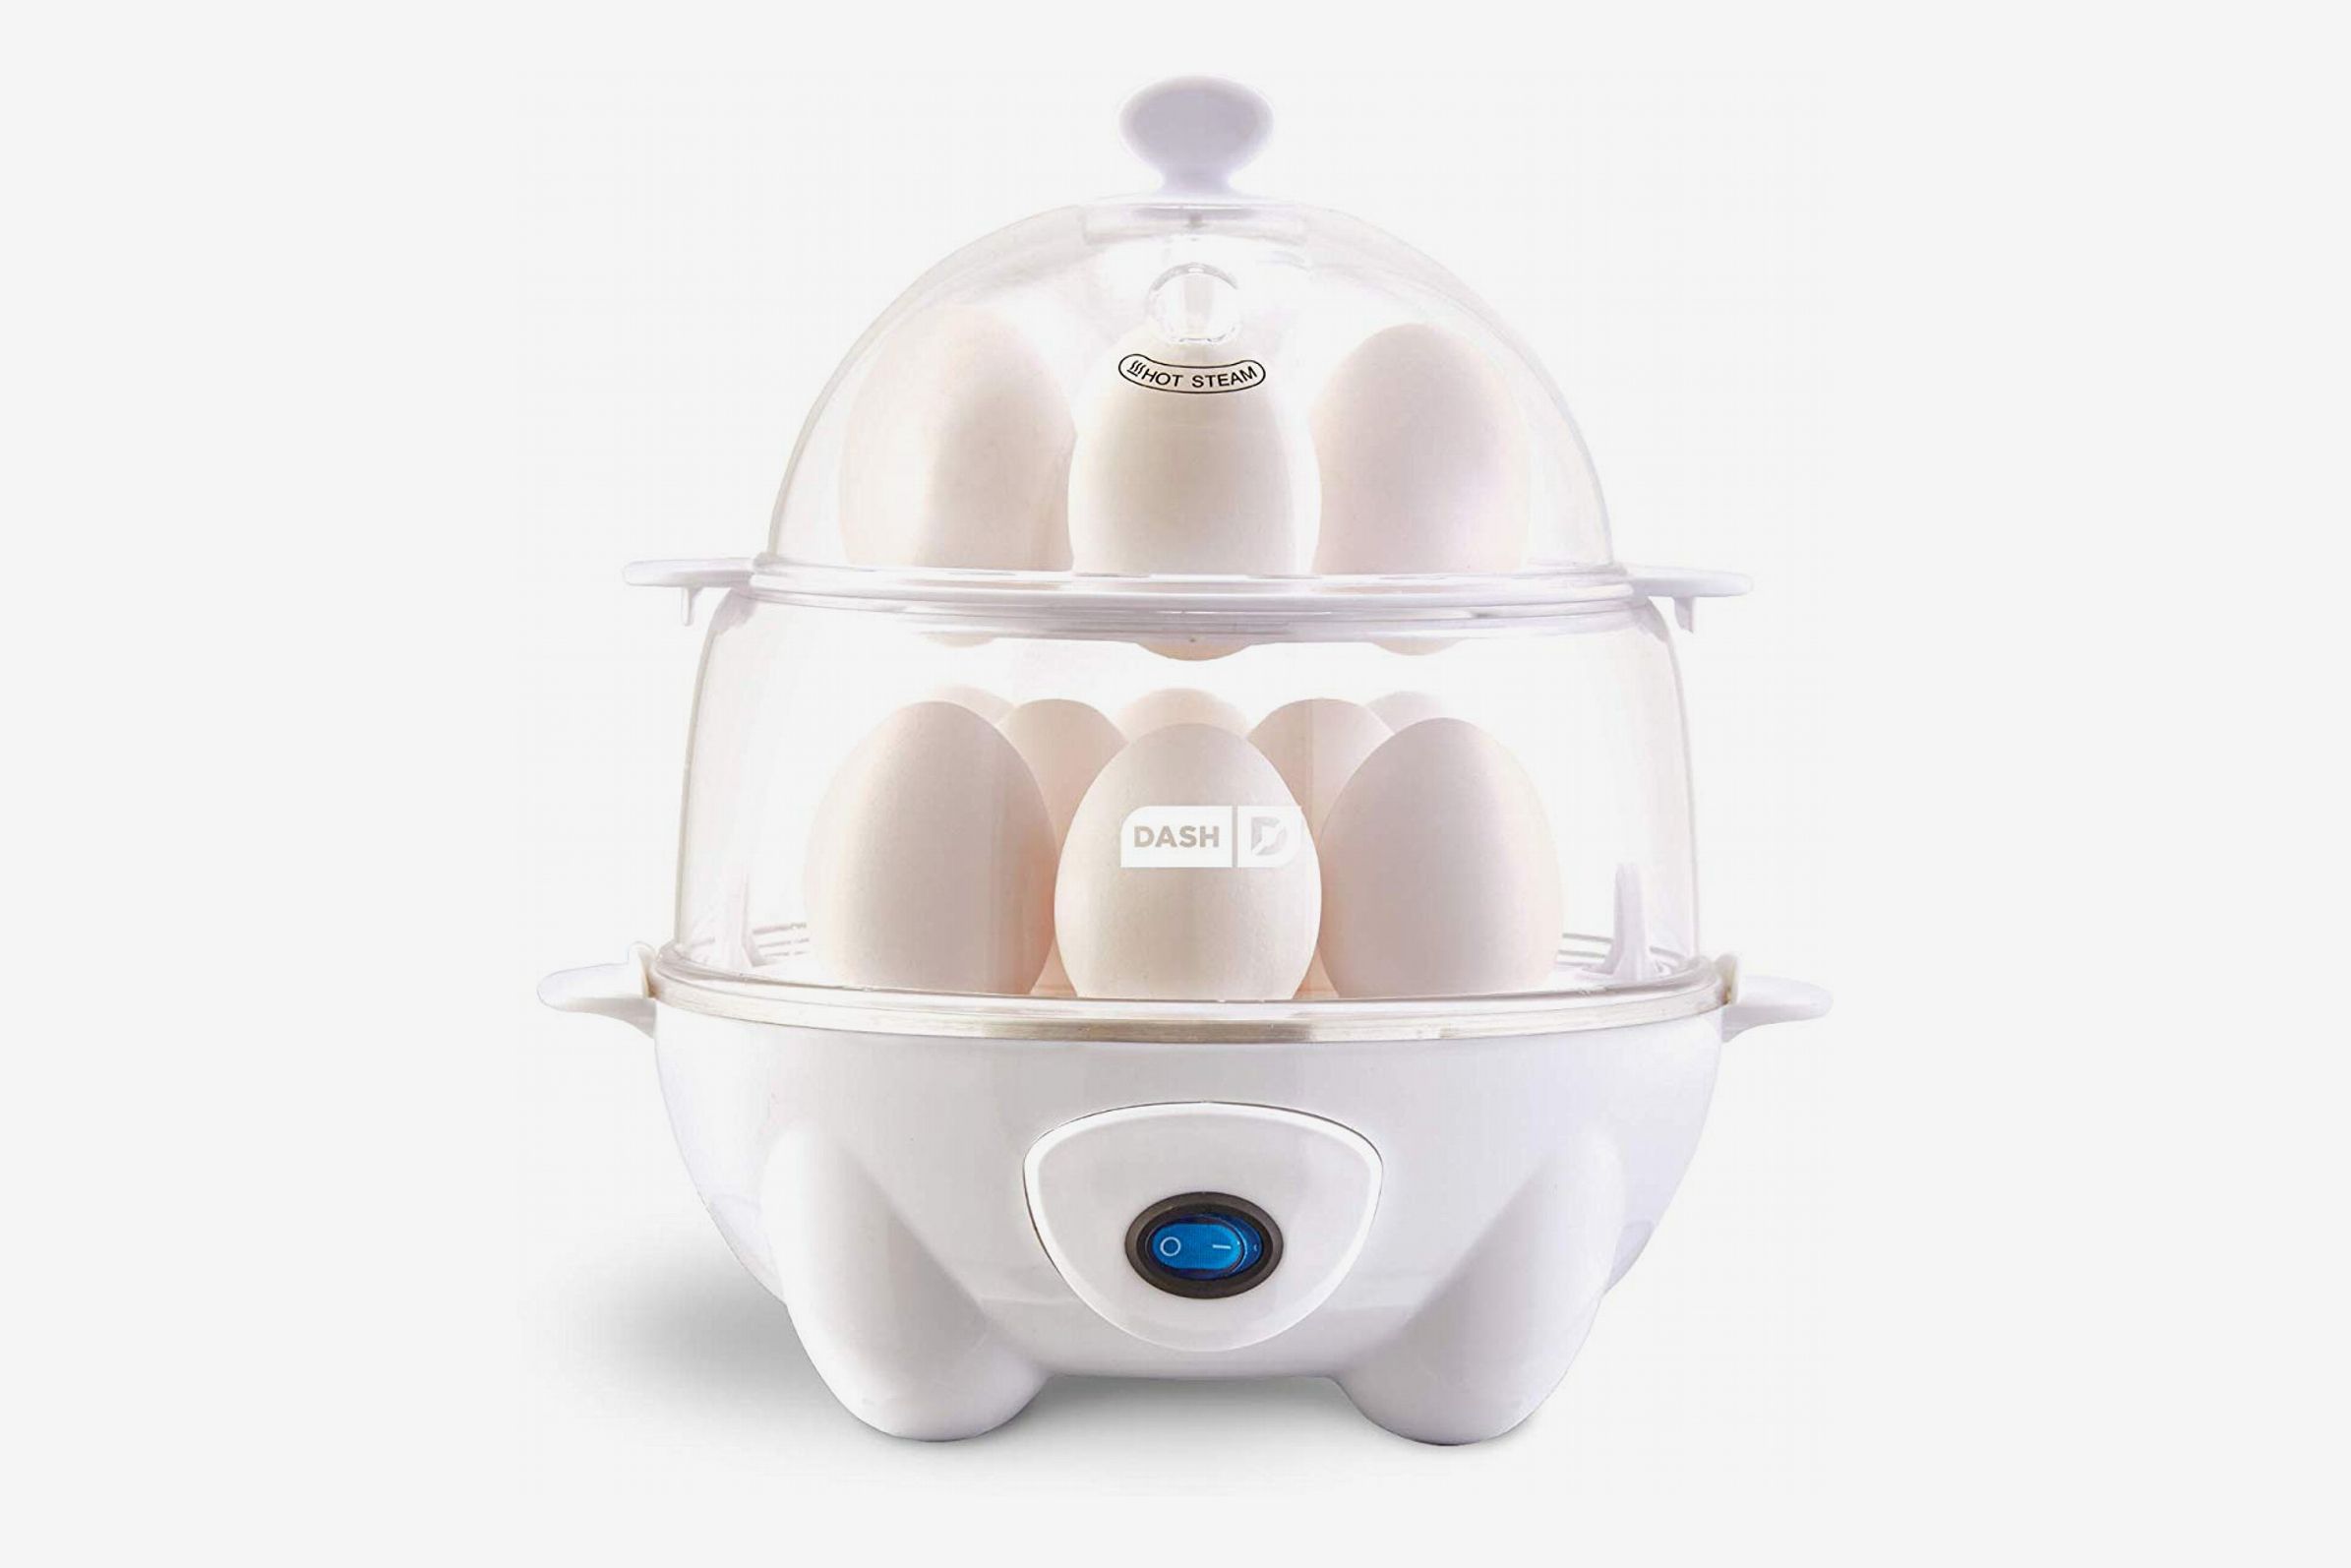 https://pyxis.nymag.com/v1/imgs/18b/ad7/e81d7616ebed5ef7e4f427f39cf719c9ca-dash-deluxe-rapid-egg-cooker.jpg